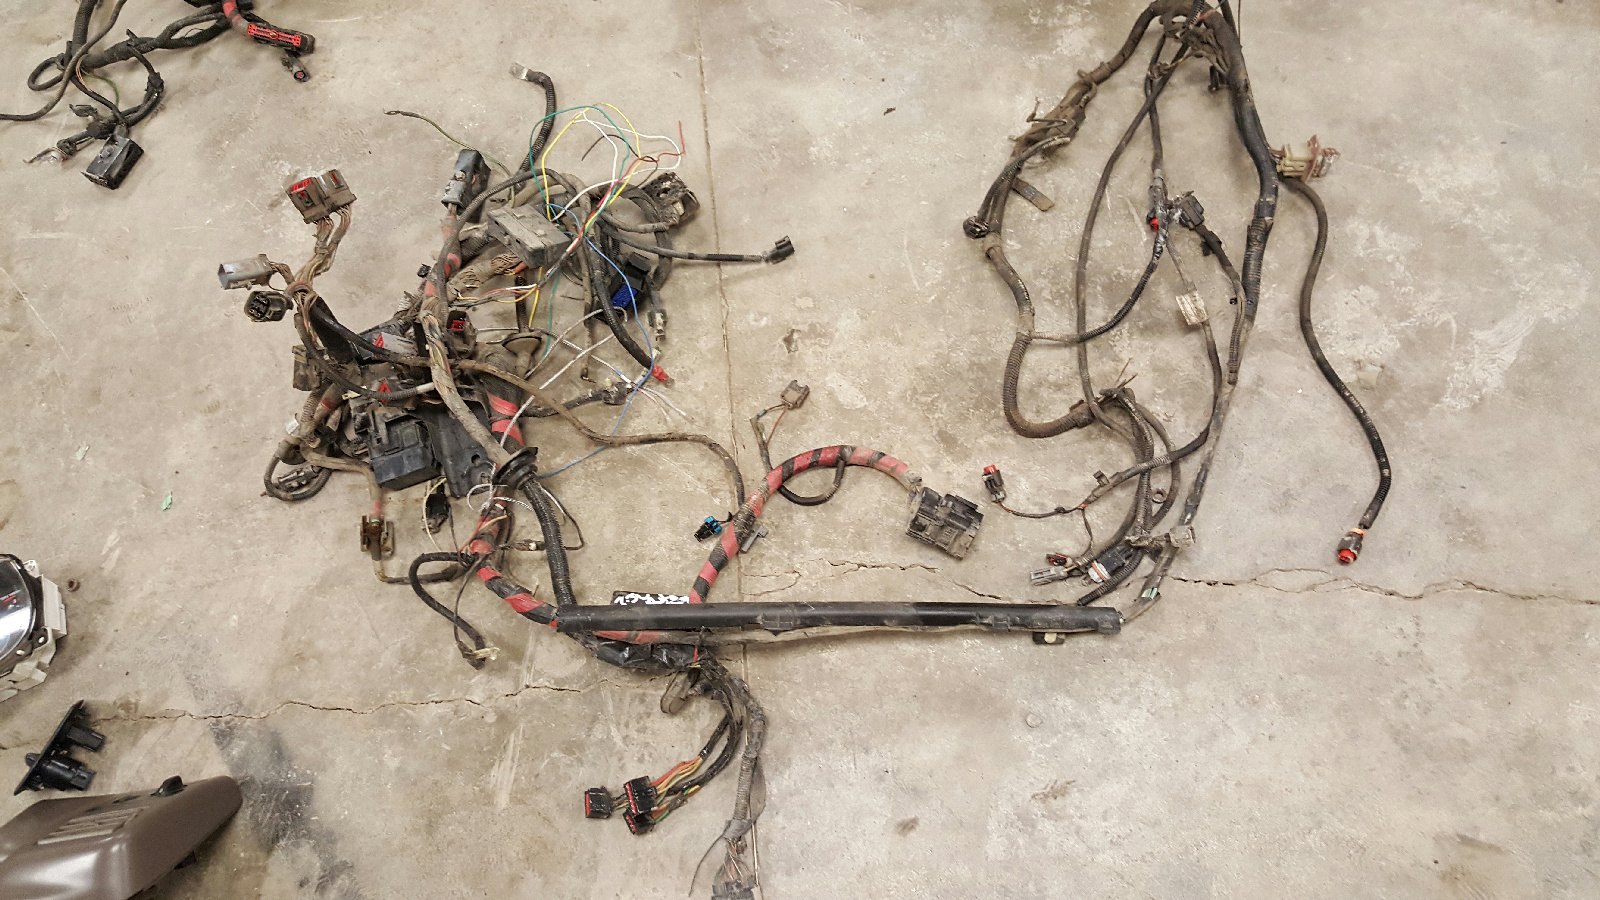 1999 2000 2001 2002 2003 Ford F250 F350 7.3L engine compartment wiring 2002 Ford F250 7.3 Engine Wiring Harness